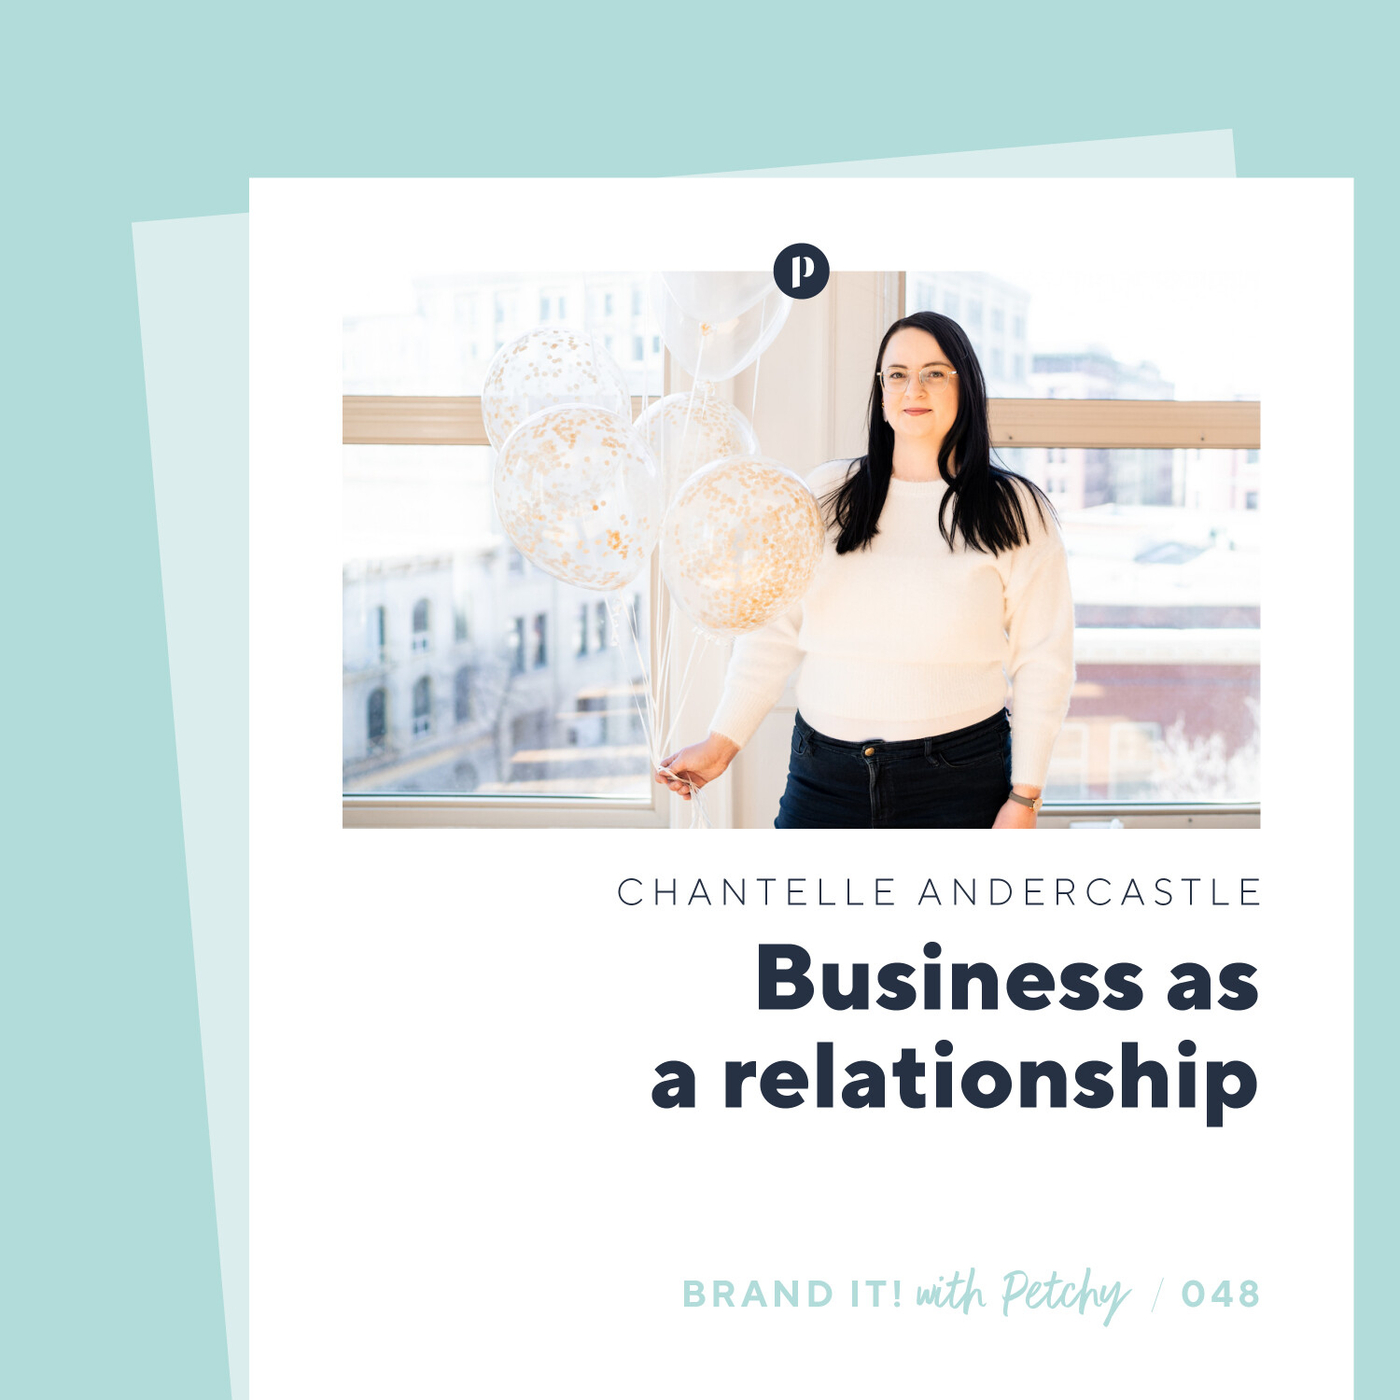 Business as a relationship w/ Chantelle Andercastle - Brand it! with Petchy  - Podcast.co